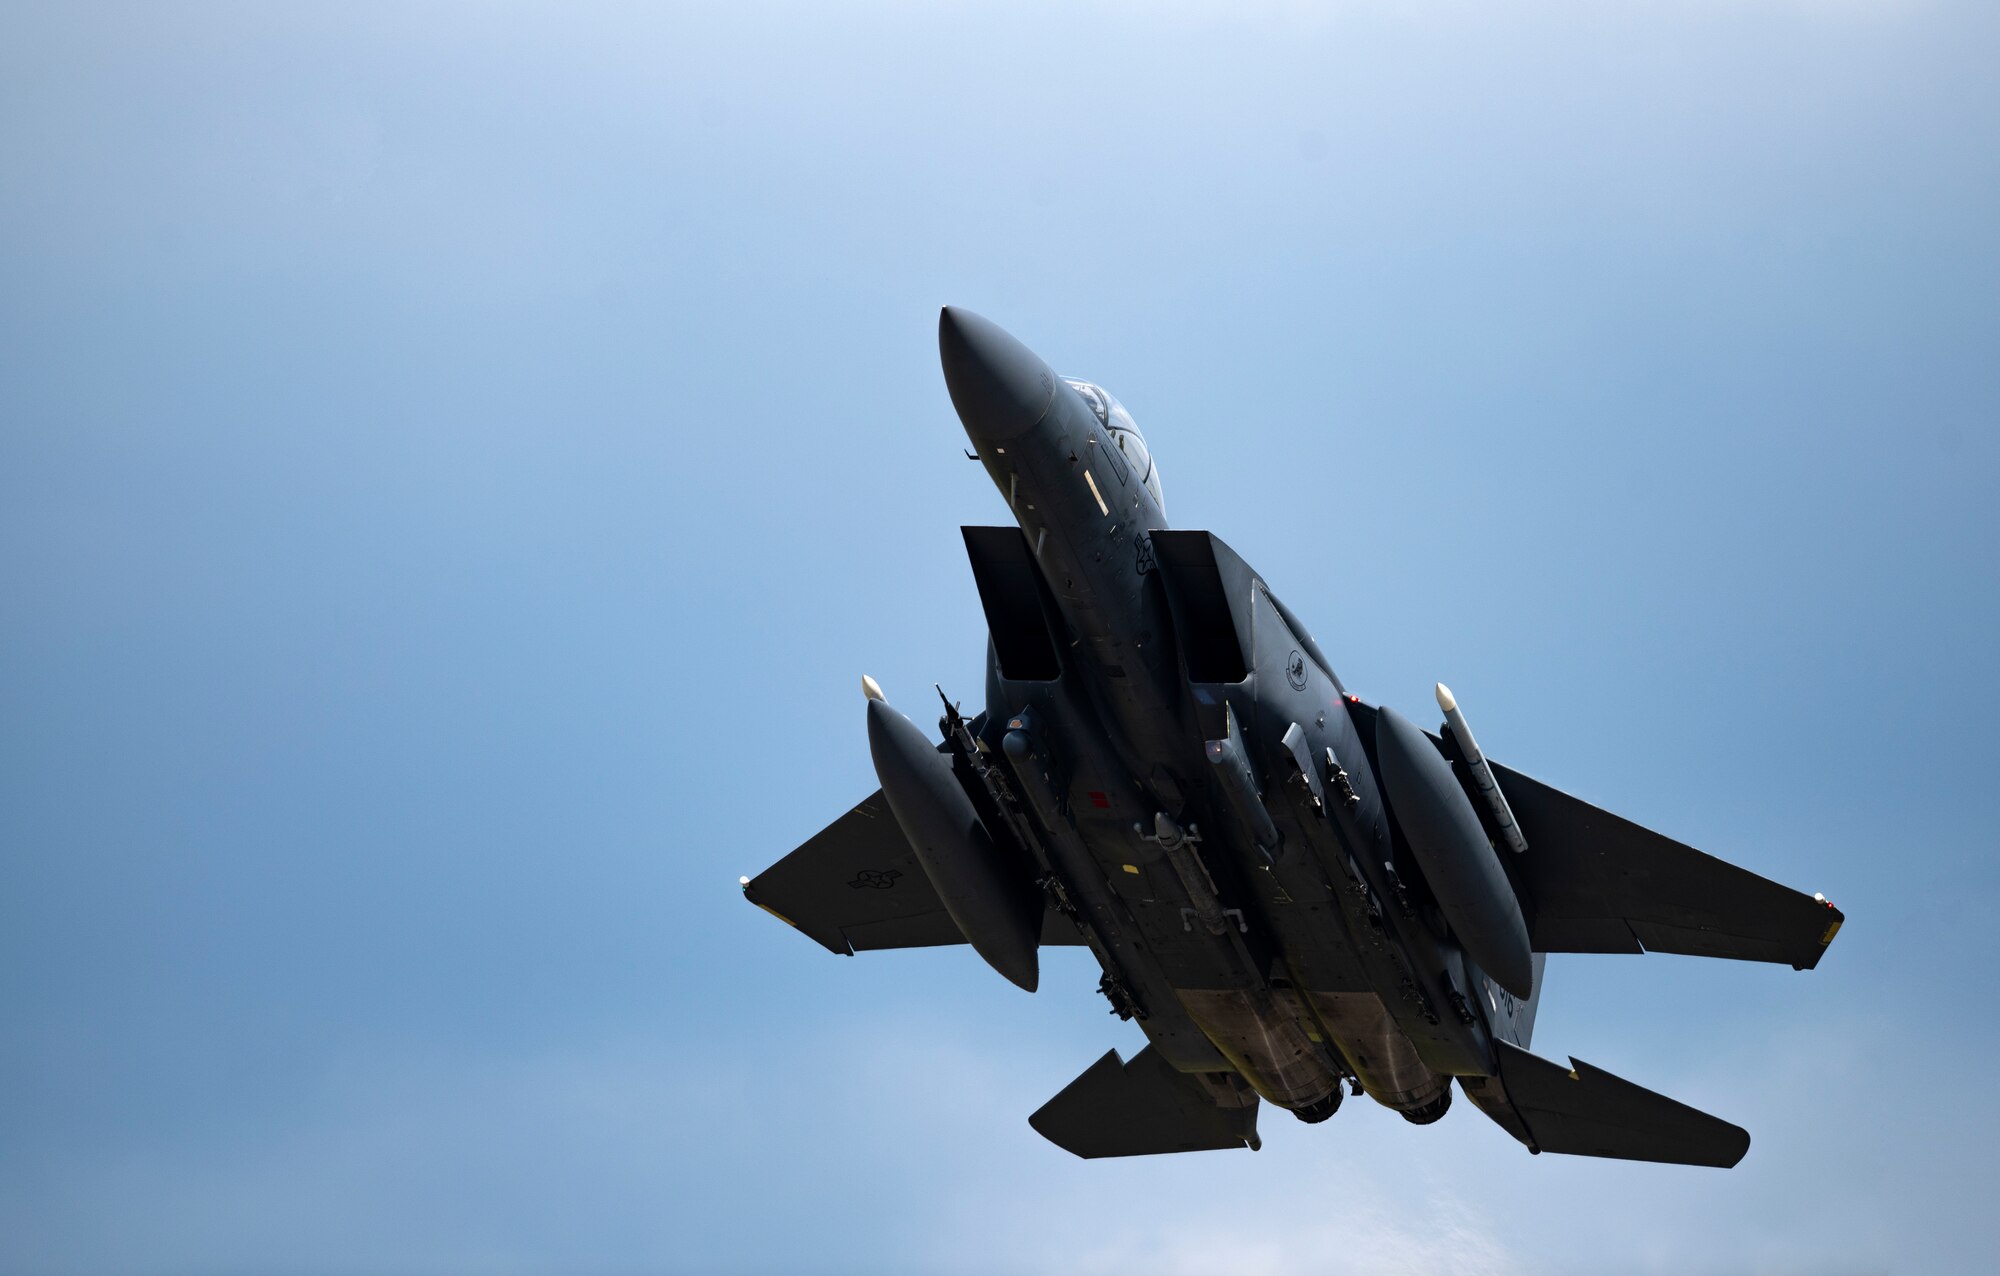 A U.S. Air Force F-15E Strike Eagle, assigned to the 492nd  Fighter Squadron, flies overhead at Royal Air Force Lakenheath, England, Sept. 1, 2020. The 48th Fighter Wing conducts routine training in order to maintain combat readiness and safeguard U.S. national interests and the collective defense of allies and partners. (U.S. Air Force photo by Airman 1st Class Jessi Monte)